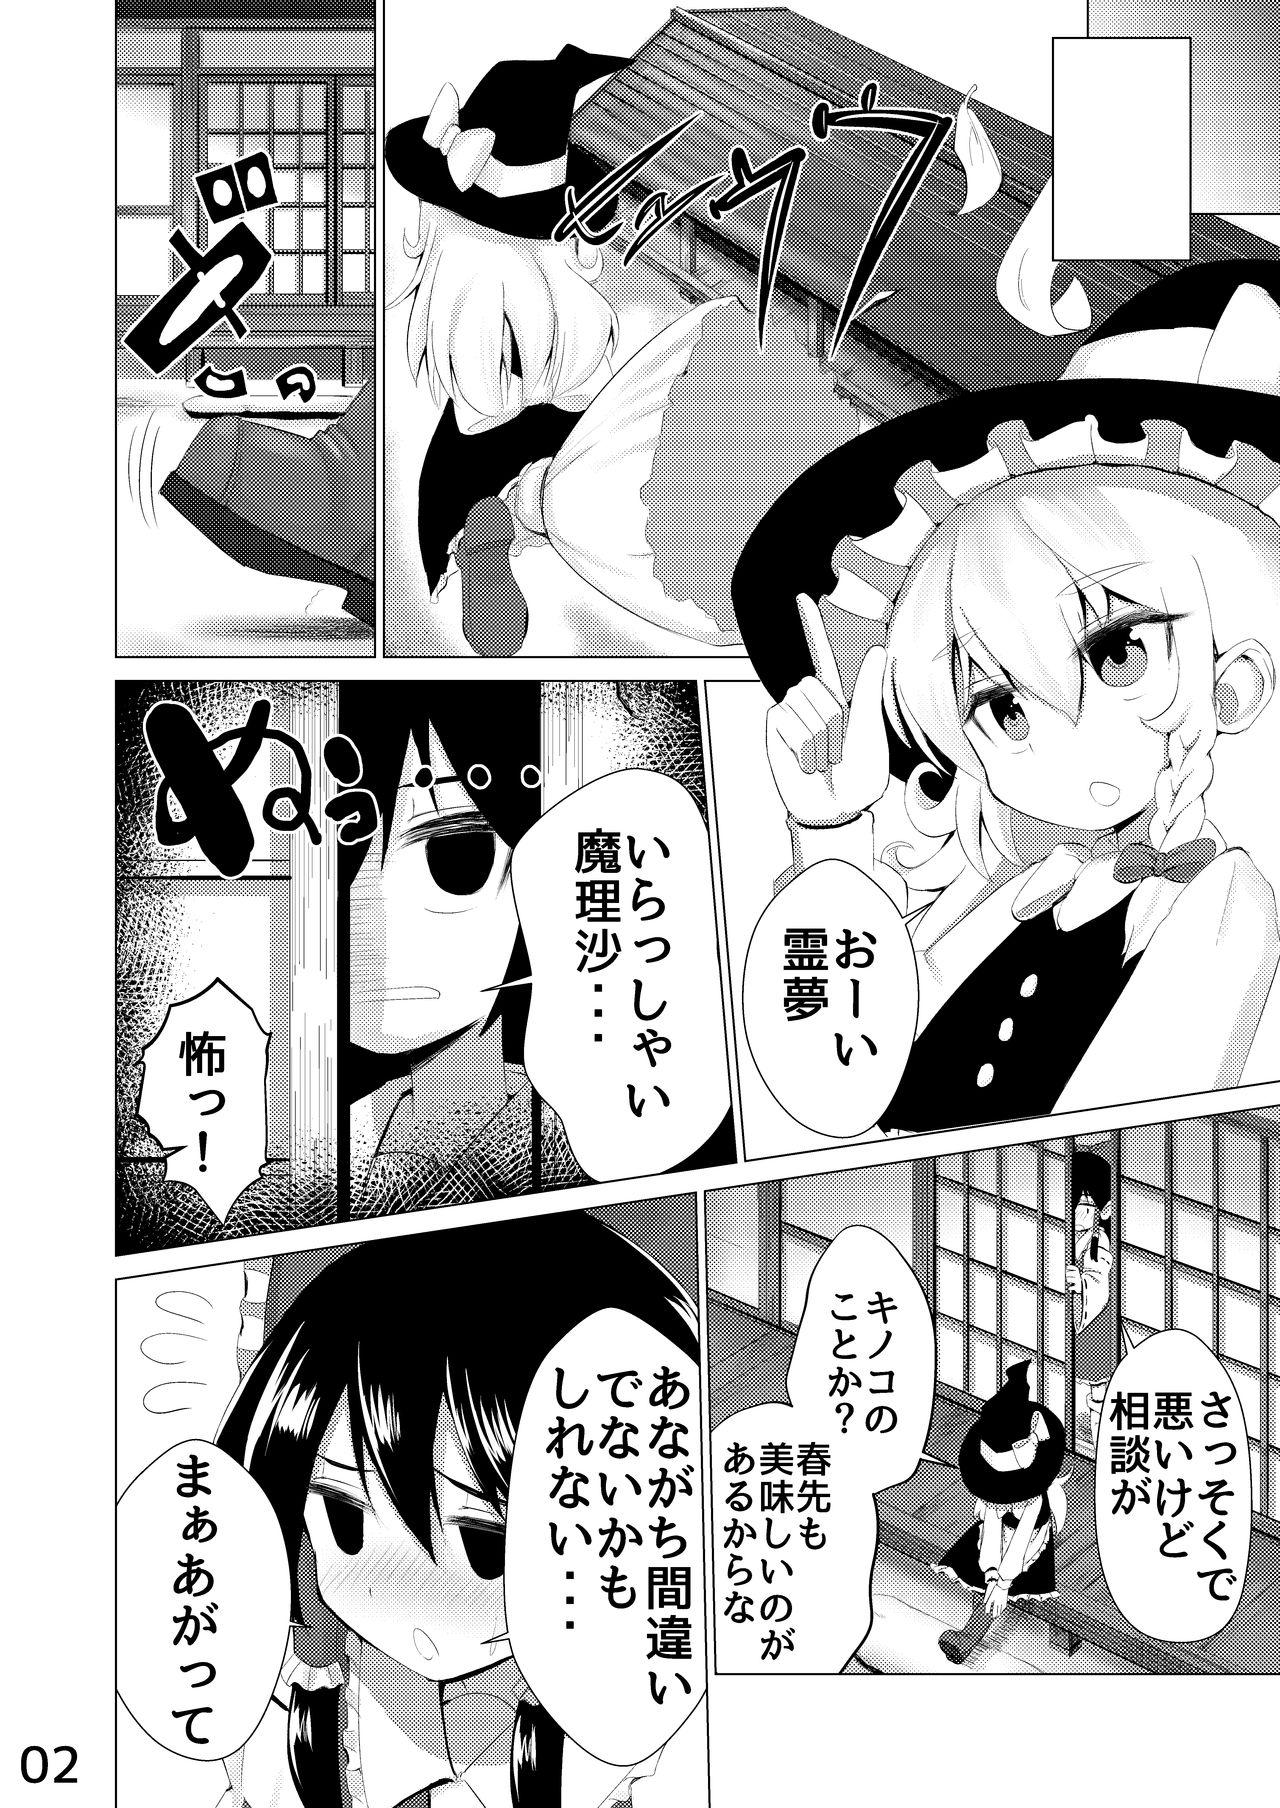 Gay Medical [NO相撲KING (吸斬) 生えた (Touhou Project) [Digital] - Touhou project Gay Pawnshop - Page 3